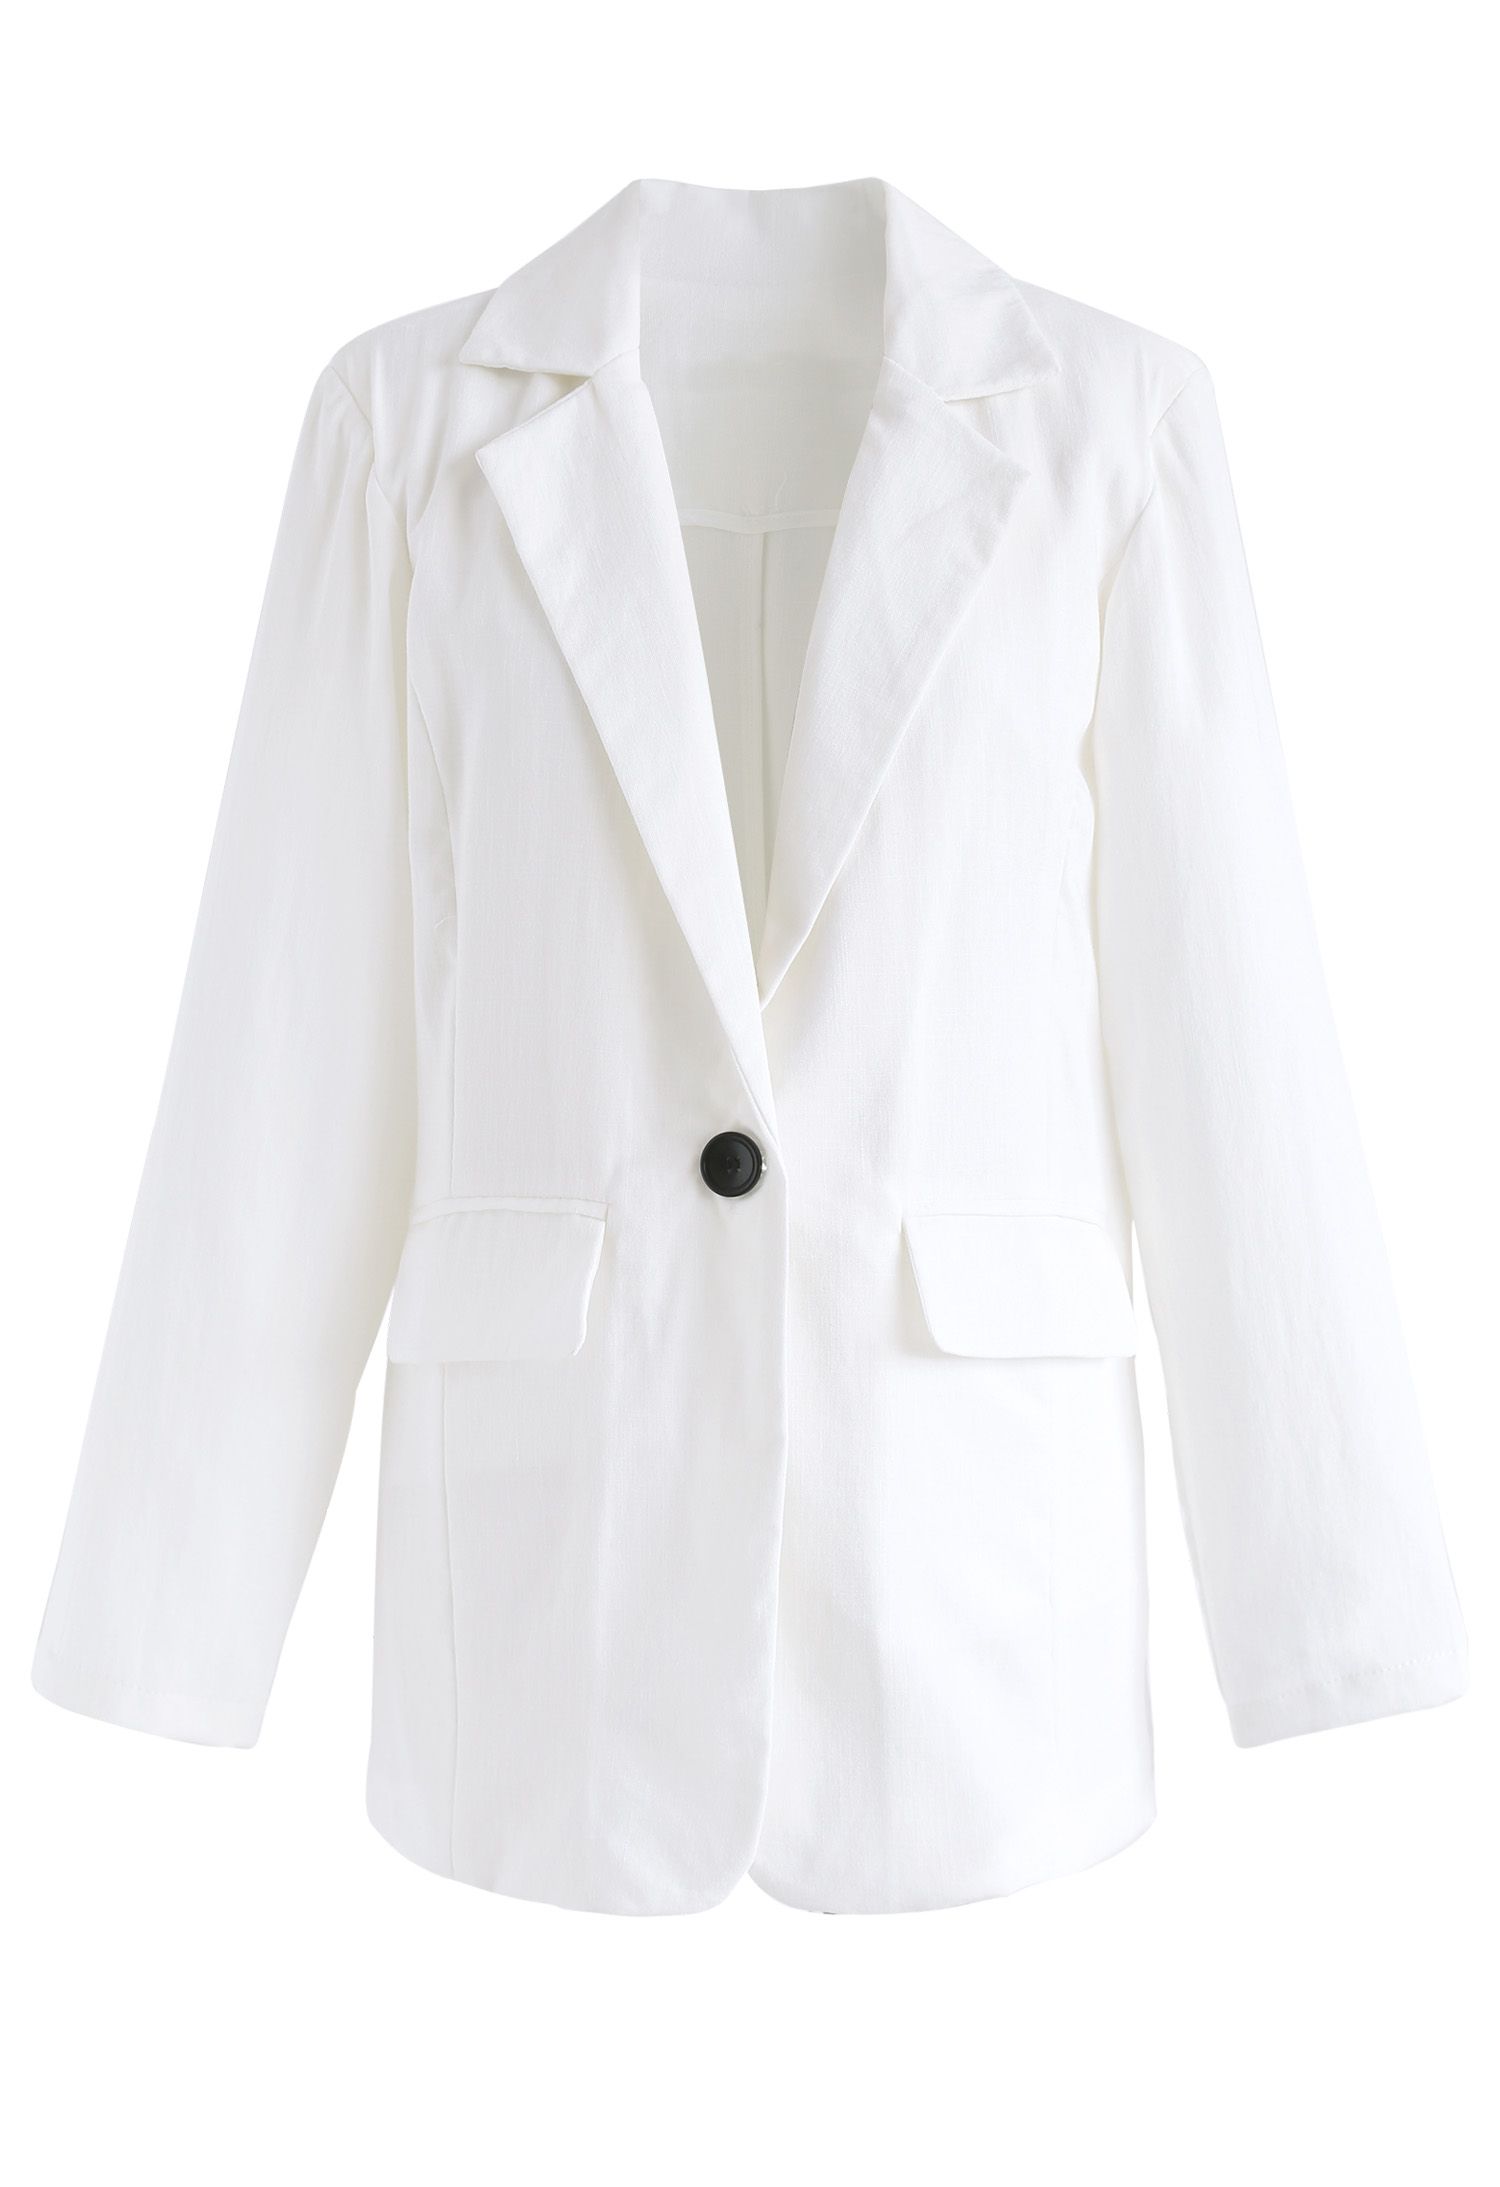 Just Like This Frontline Blazer in White